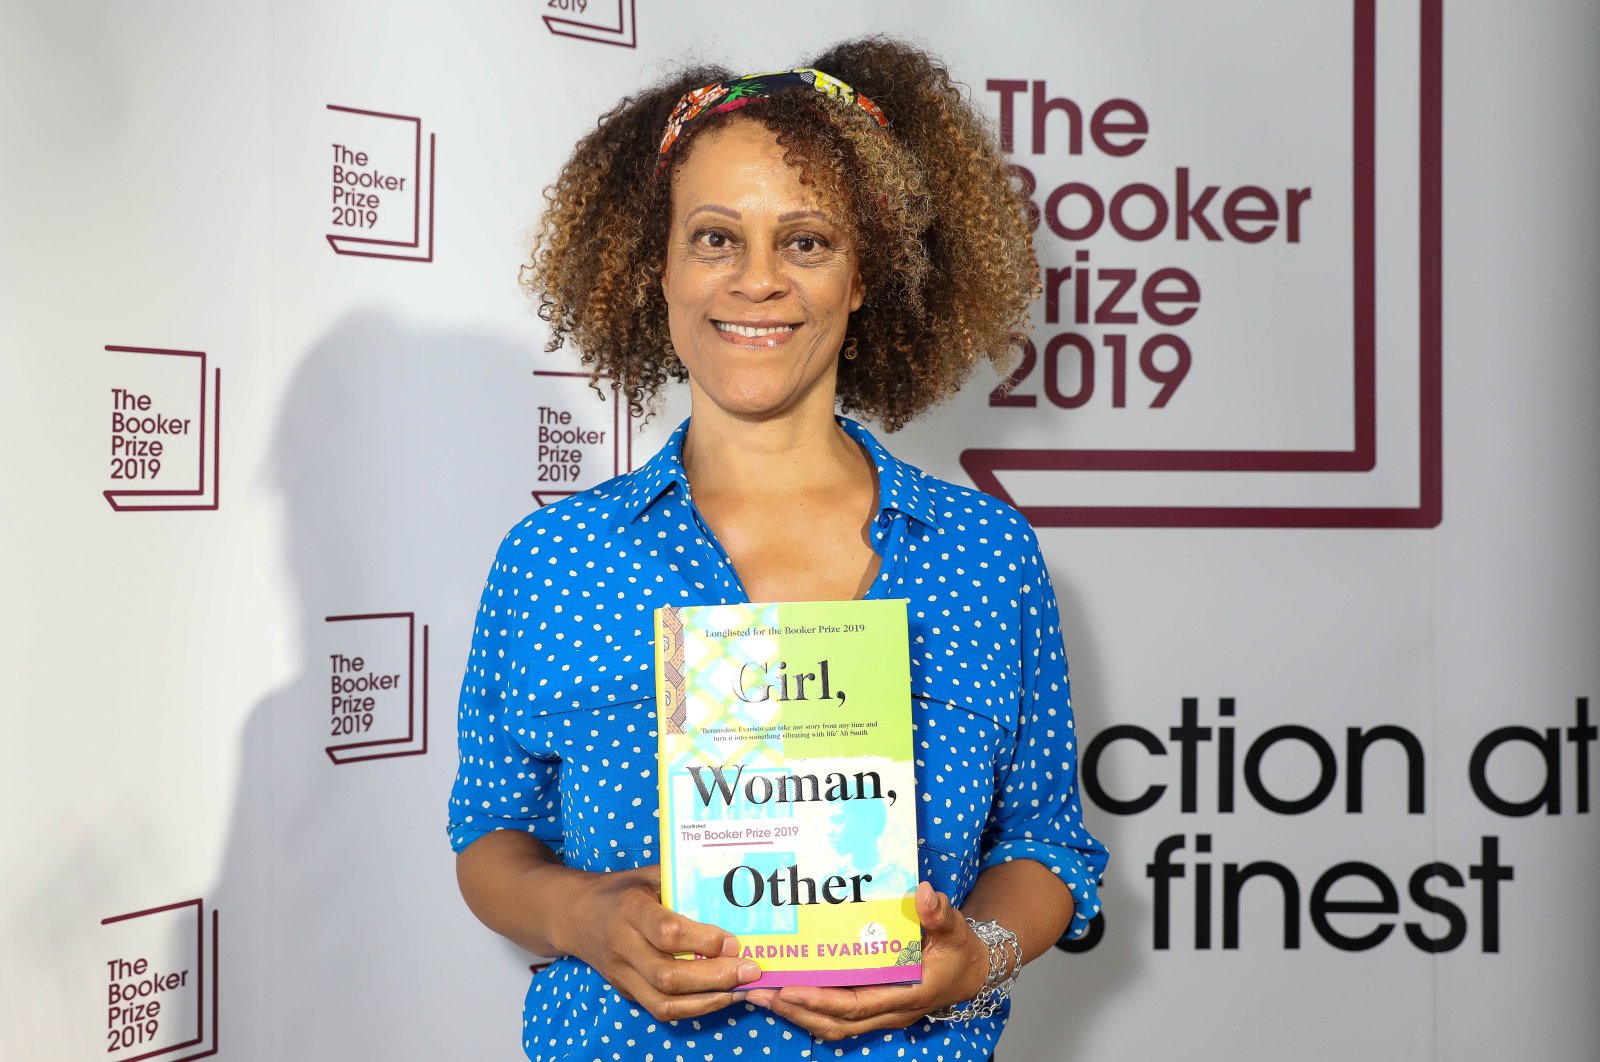 Bernardine Evaristo attends The Booker Prize 2019 party to celebrate the longlist, London, England, Sept. 3, 2019. (Getty Images)